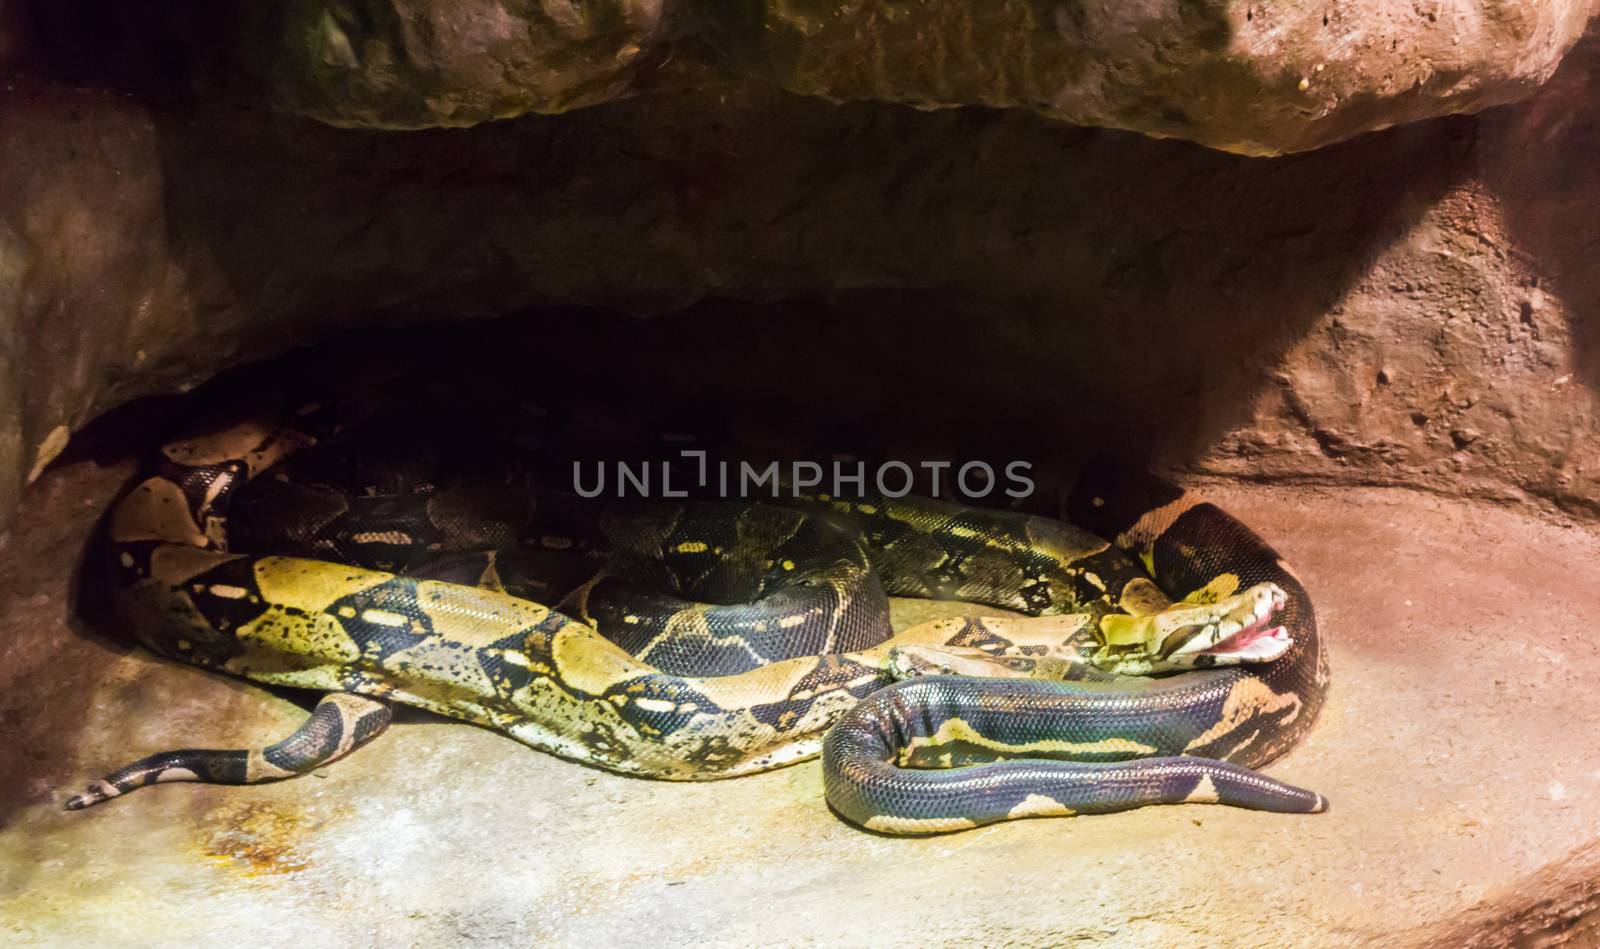 two boa constrictor snakes together under a rock one with open mouth by charlottebleijenberg